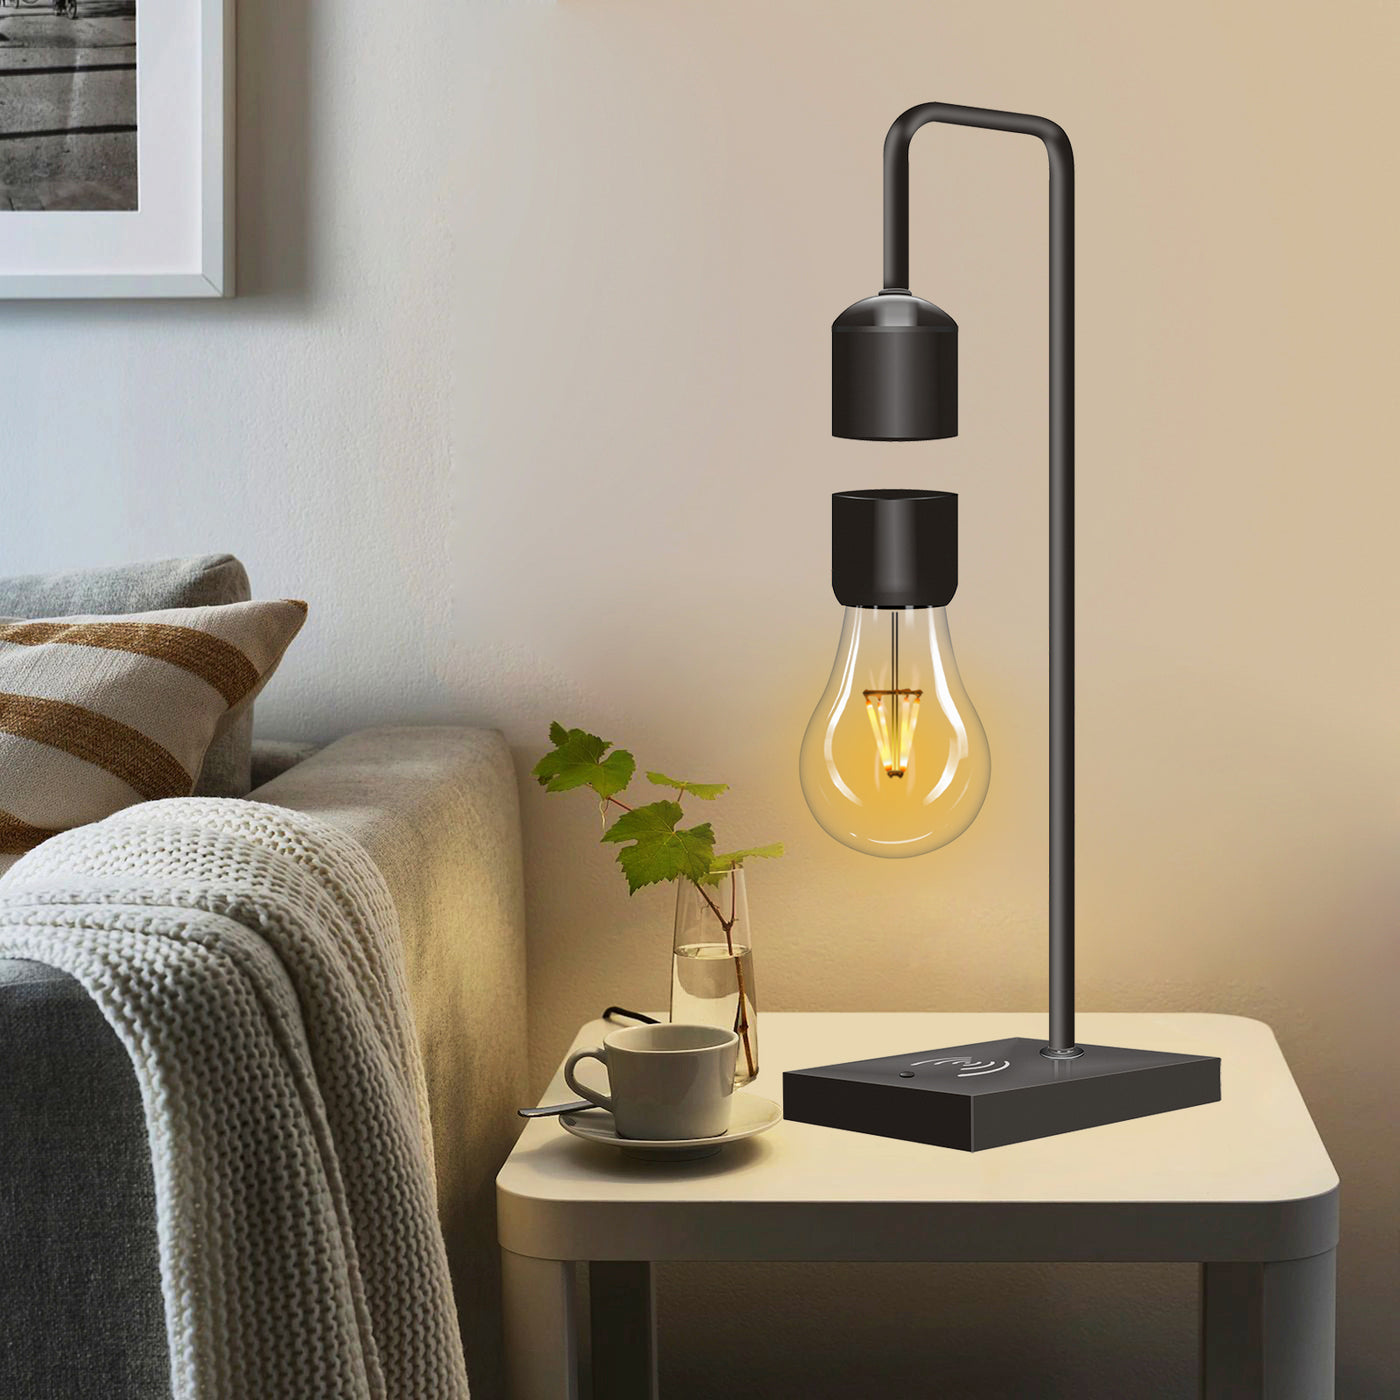 LANGTU Table Desk Smart Lamp with Magnetic Levitating Floating Wireless LED Light Bulb and Wireless Charger Square Base Black